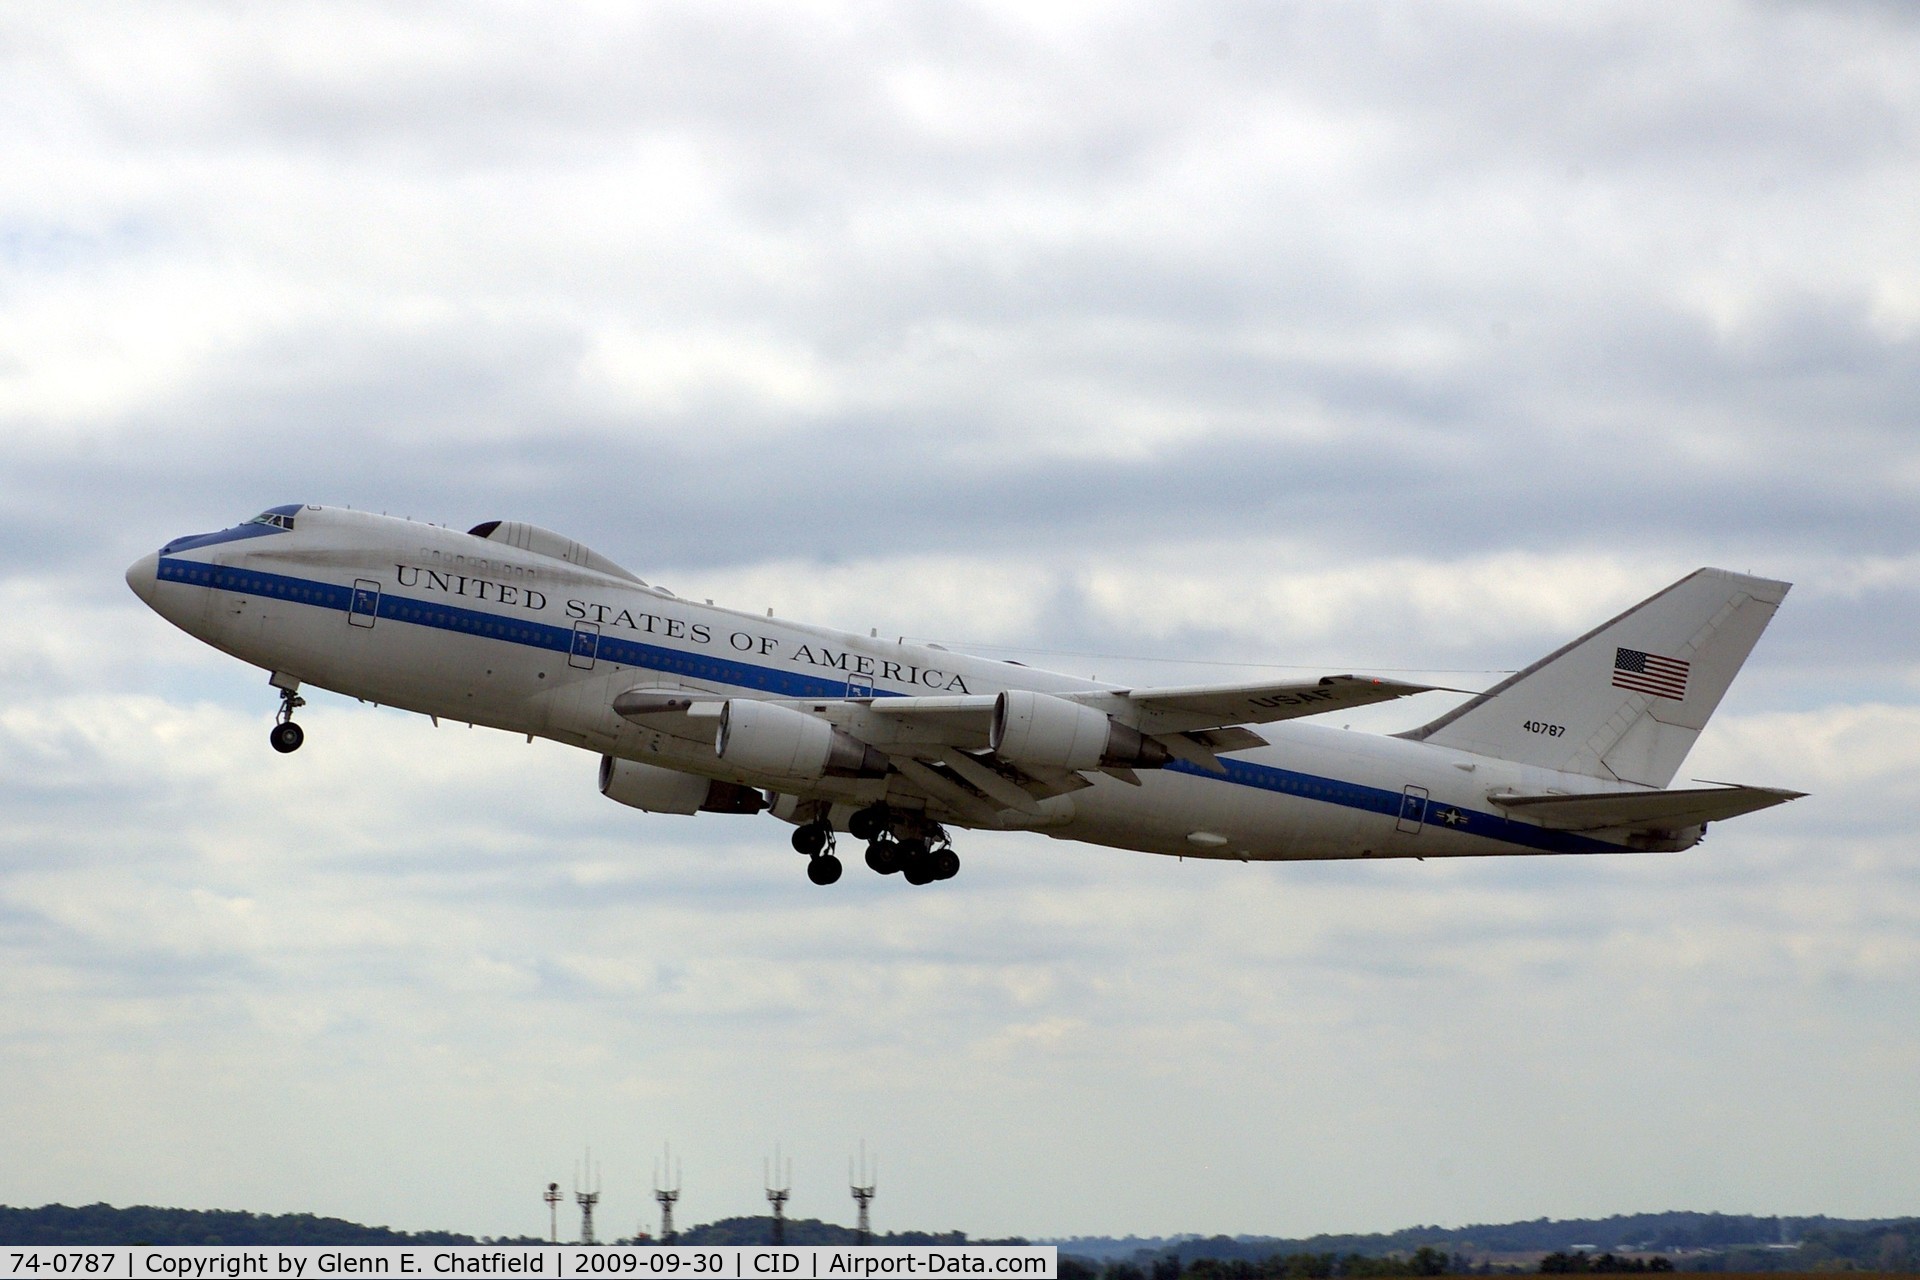 74-0787, 1974 Boeing E-4B C/N 20684, 5th and last touch and go for me, then I have to go back to work